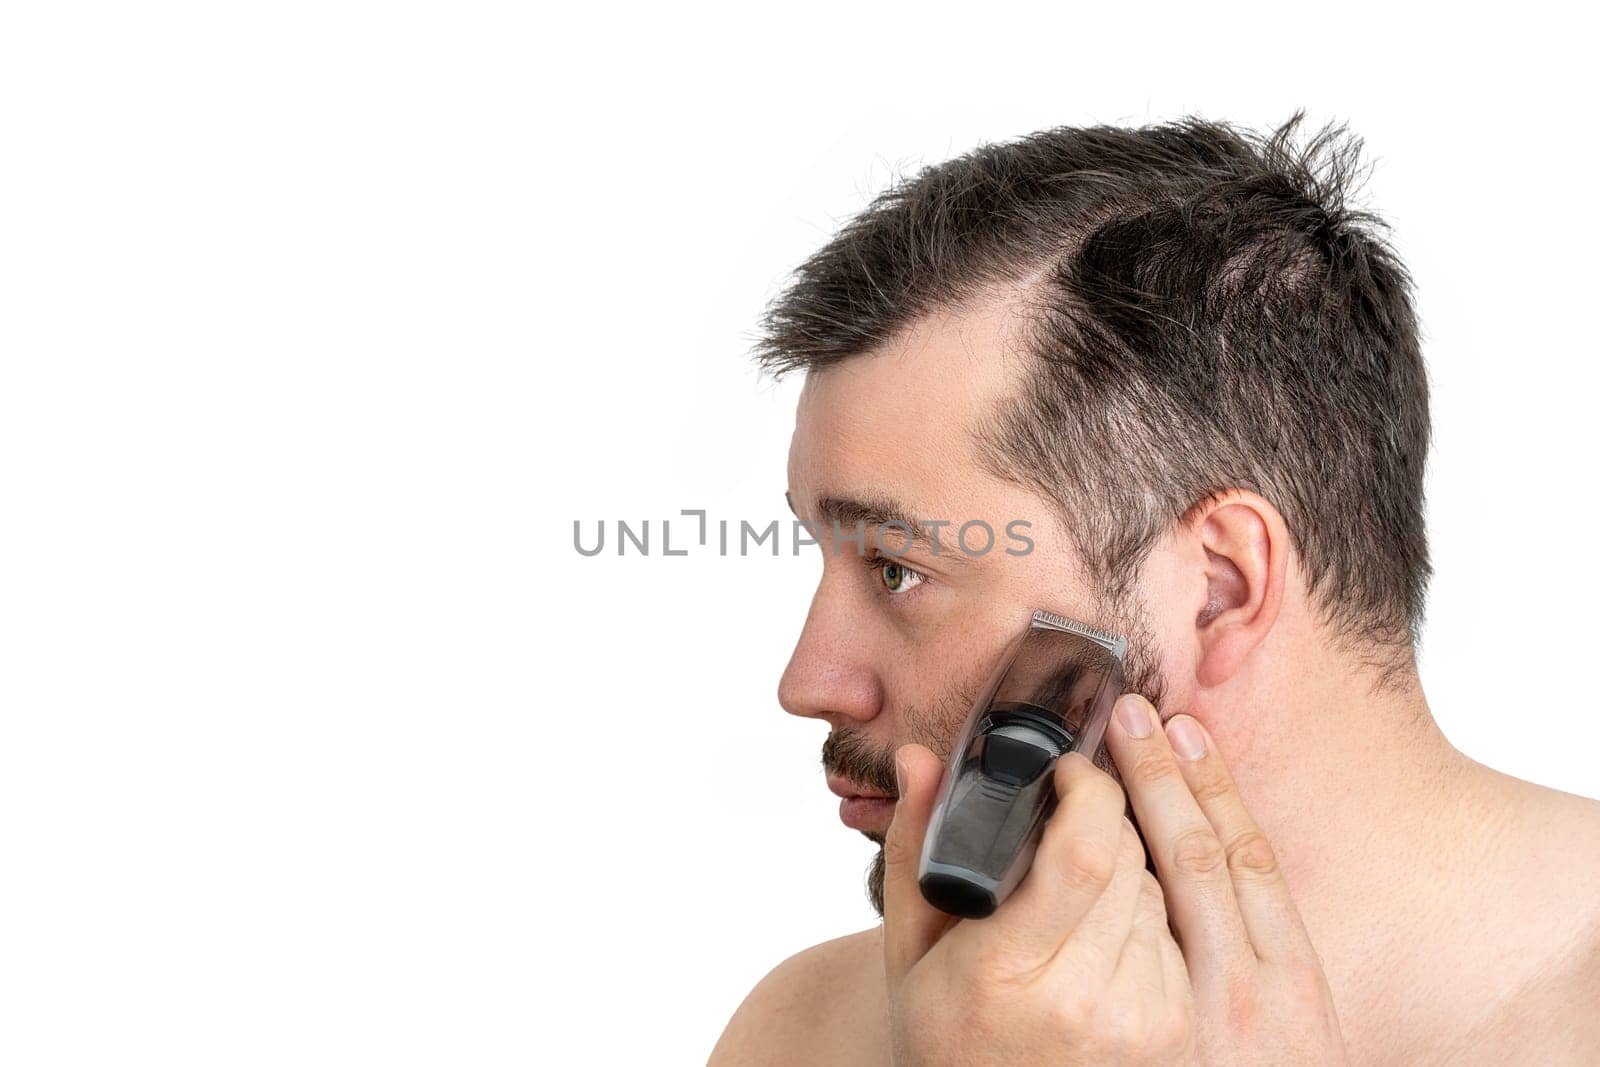 Close-up of a young man shaving his face with an electric razor, isolated on a white background. The man is focused and engaged in his grooming routine.